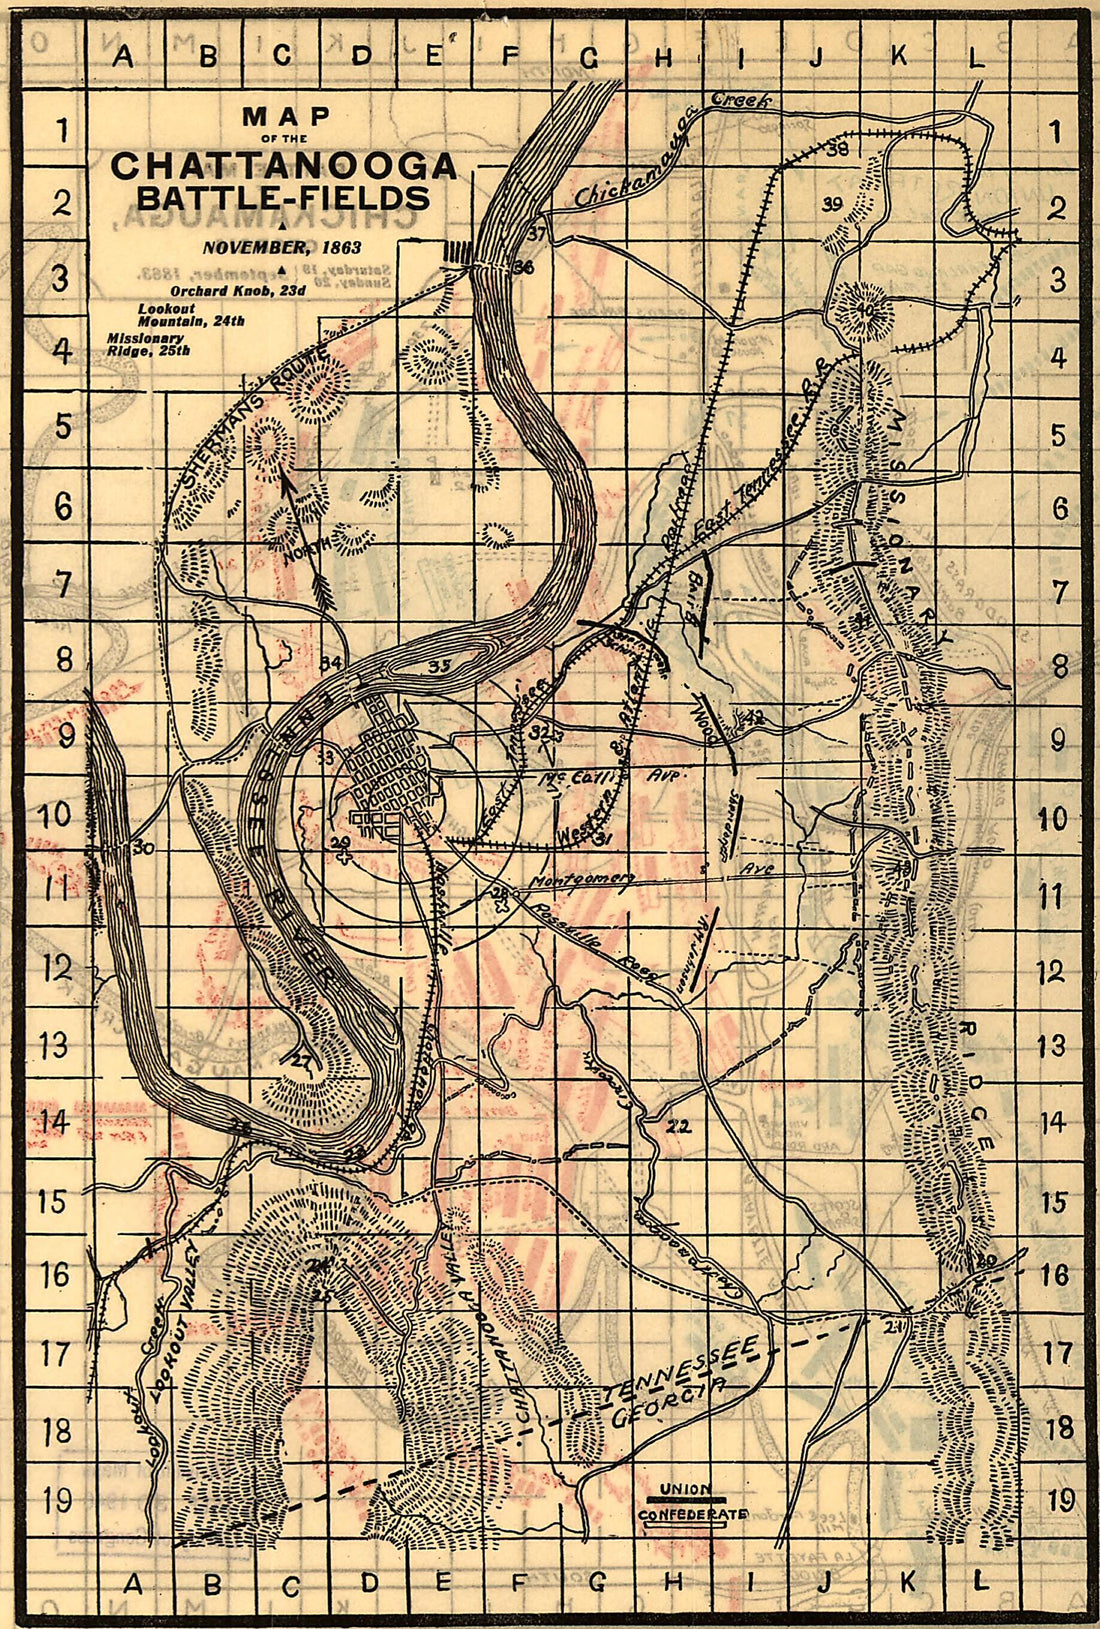 This old map of Fields, November, 1863. Orchard Knob, 23d, Lookout Mountain, 24th, Missionary Ridge, 25th from 1898 was created by Charles W. Norwood in 1898